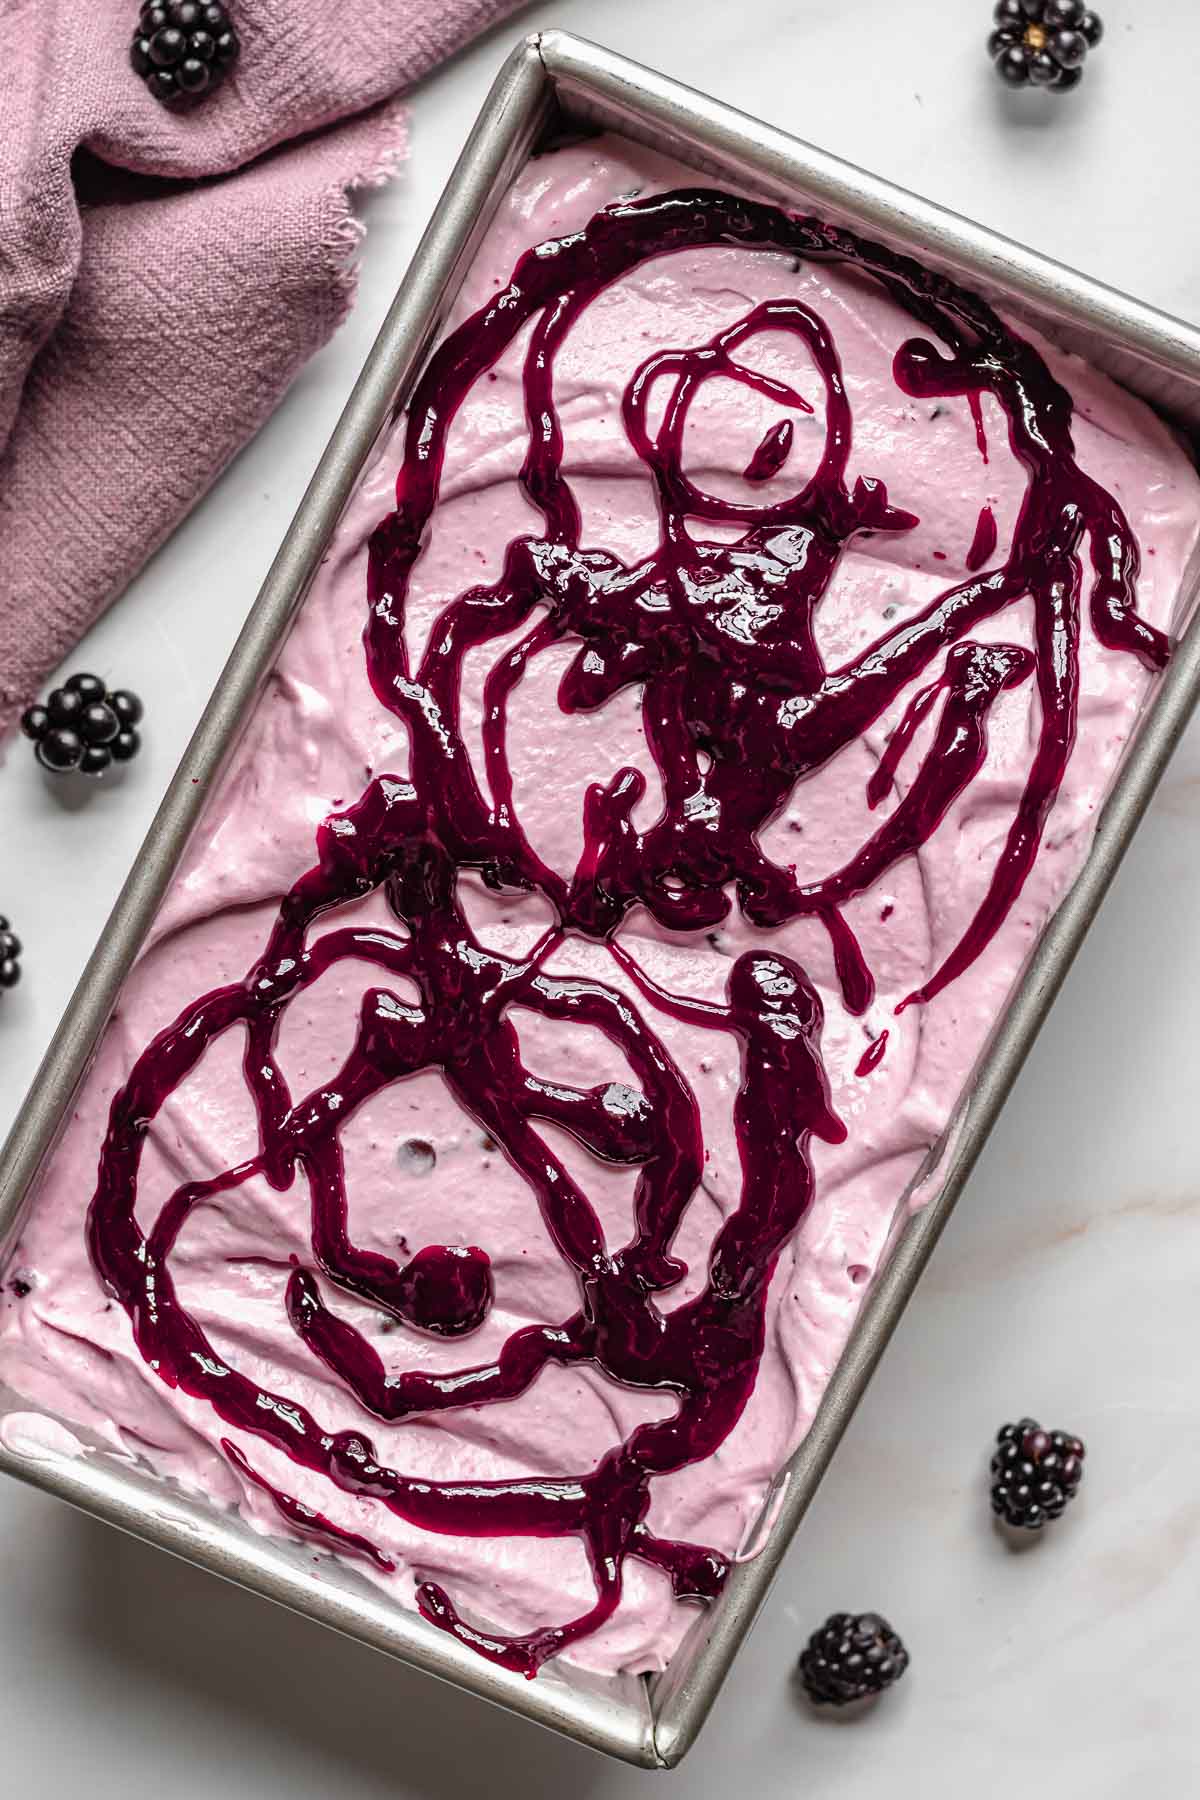 Black raspberry puree drizzled on top of the ice cream.